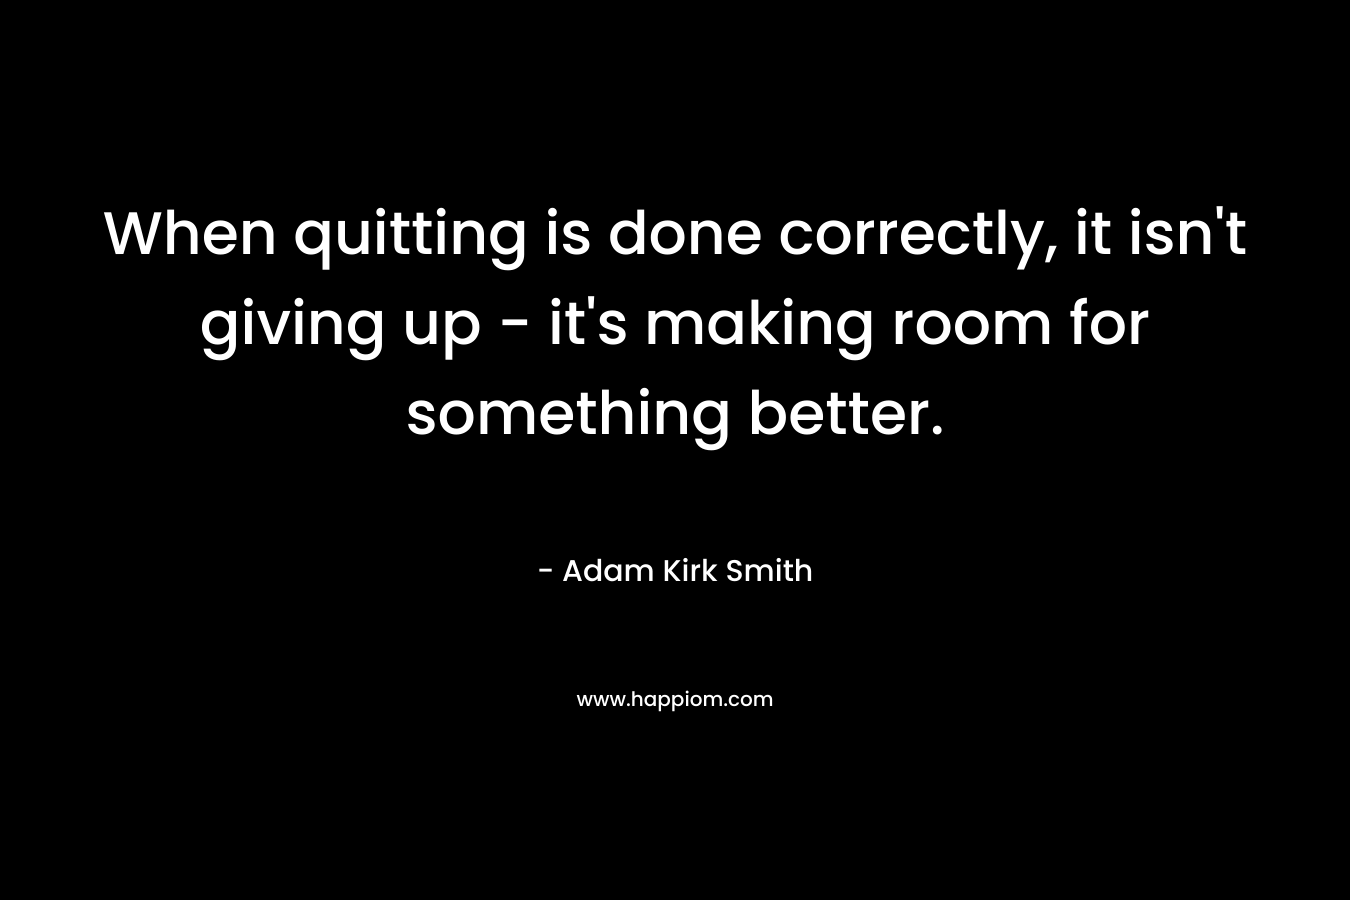 When quitting is done correctly, it isn’t giving up – it’s making room for something better. – Adam Kirk Smith